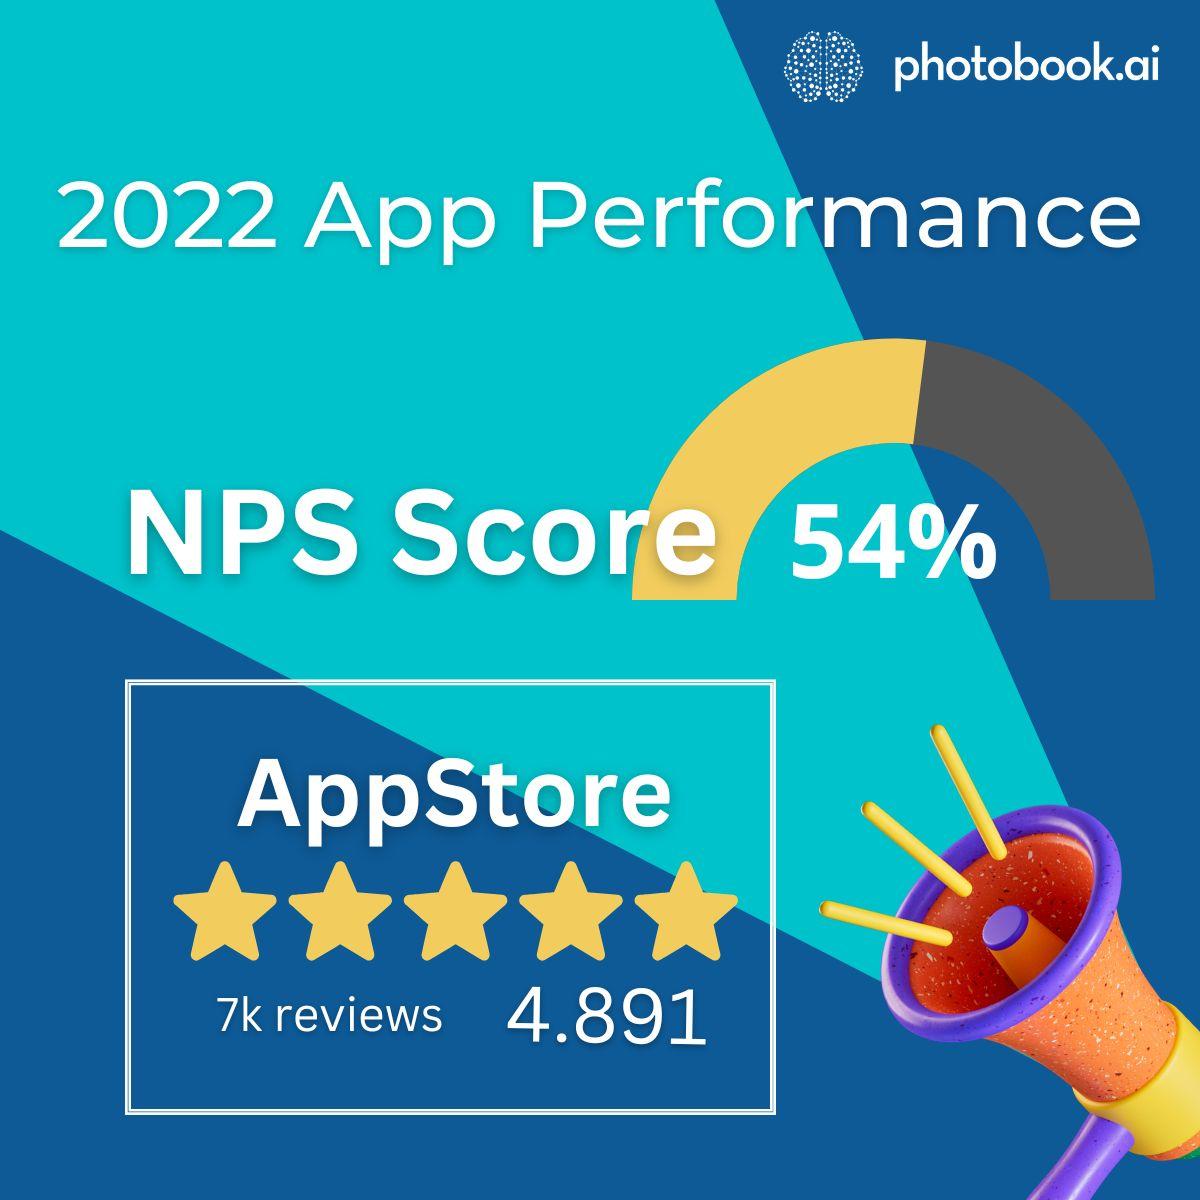 Our apps achieve a 54% NPS score in our 2022 App Performance Review -  Photobook AI - Visual Intelligence